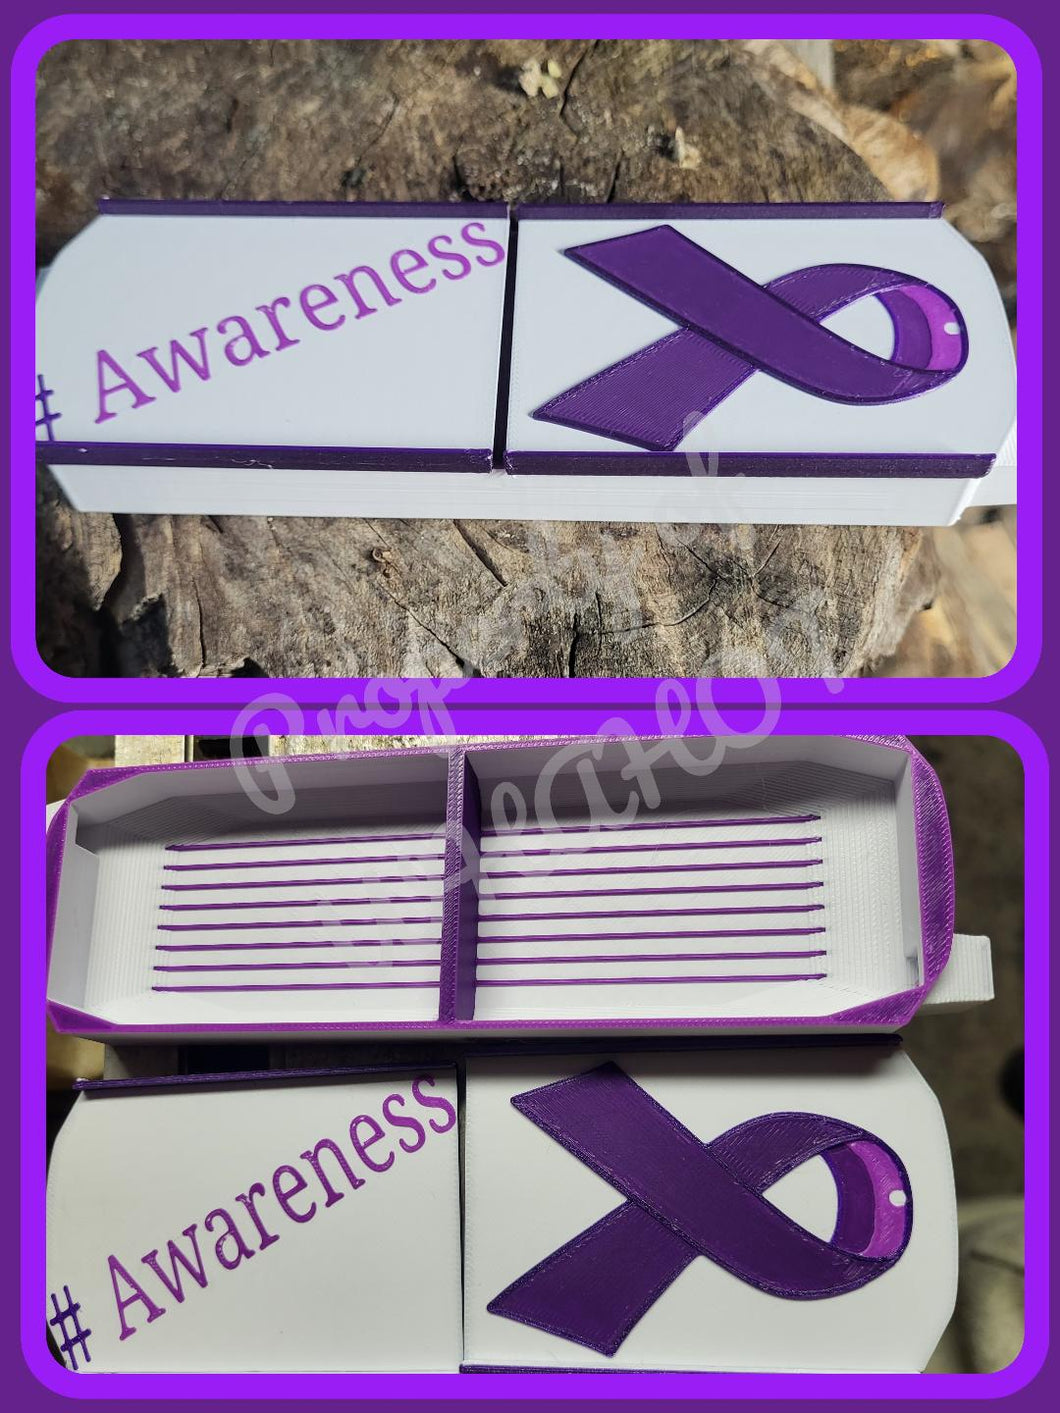 #Awareness divided tray for domestic violence